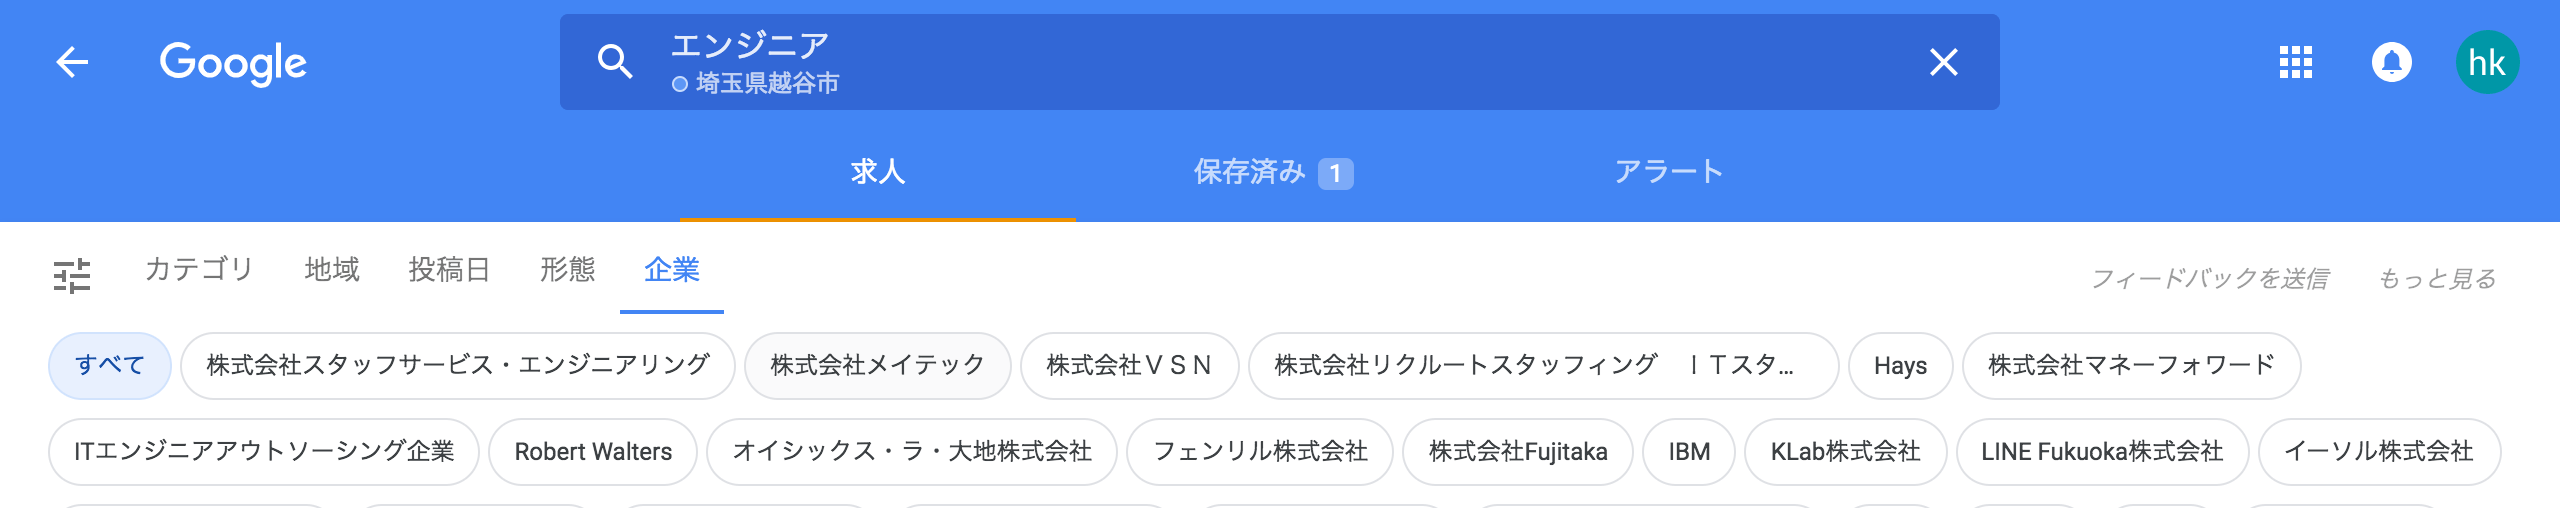 Google for Jobs検索フィルタ 企業